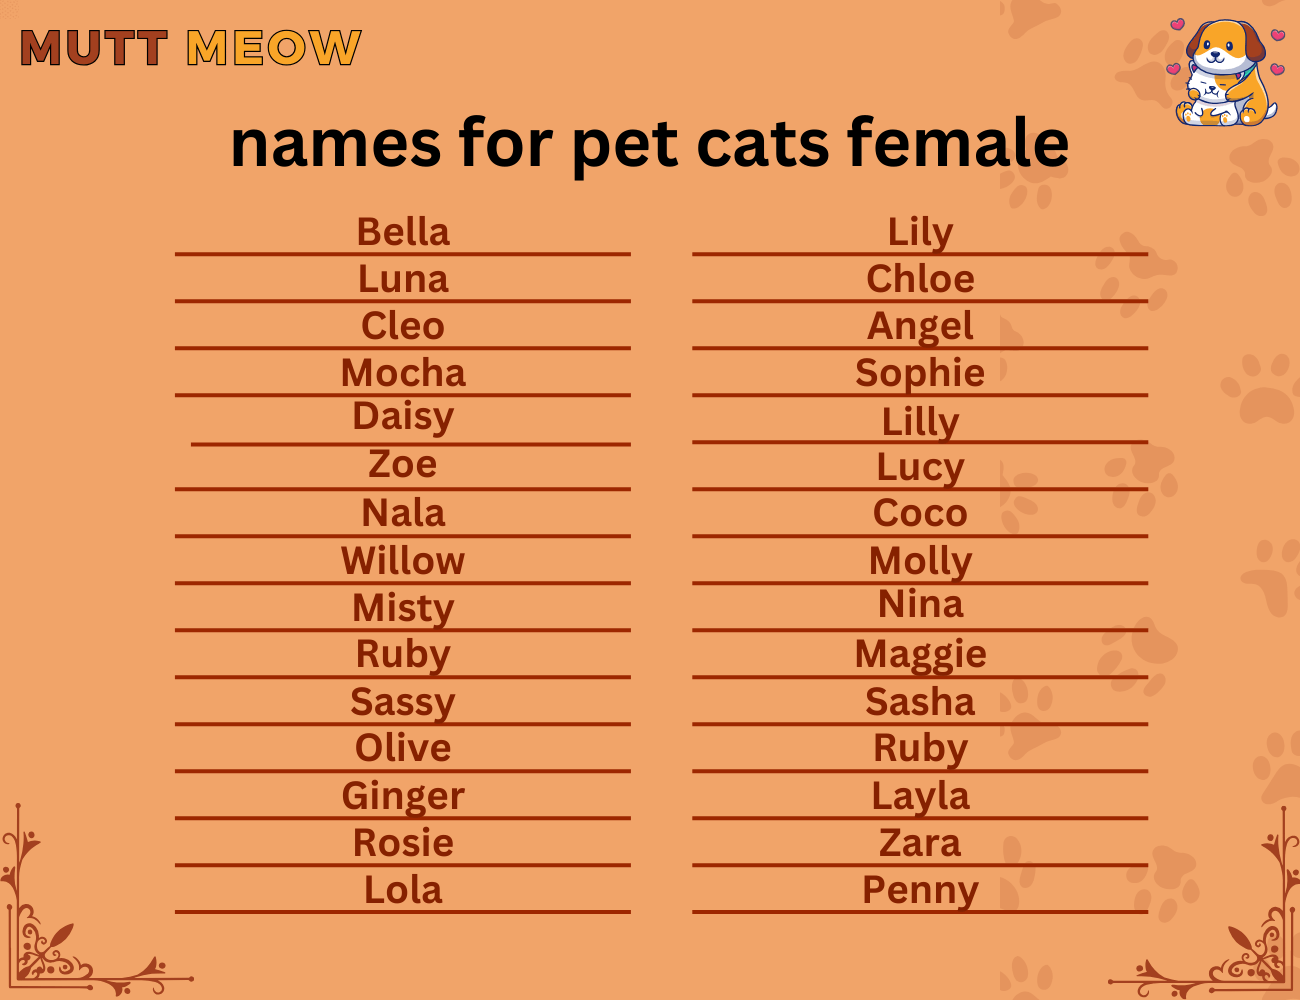 names for pet cats female